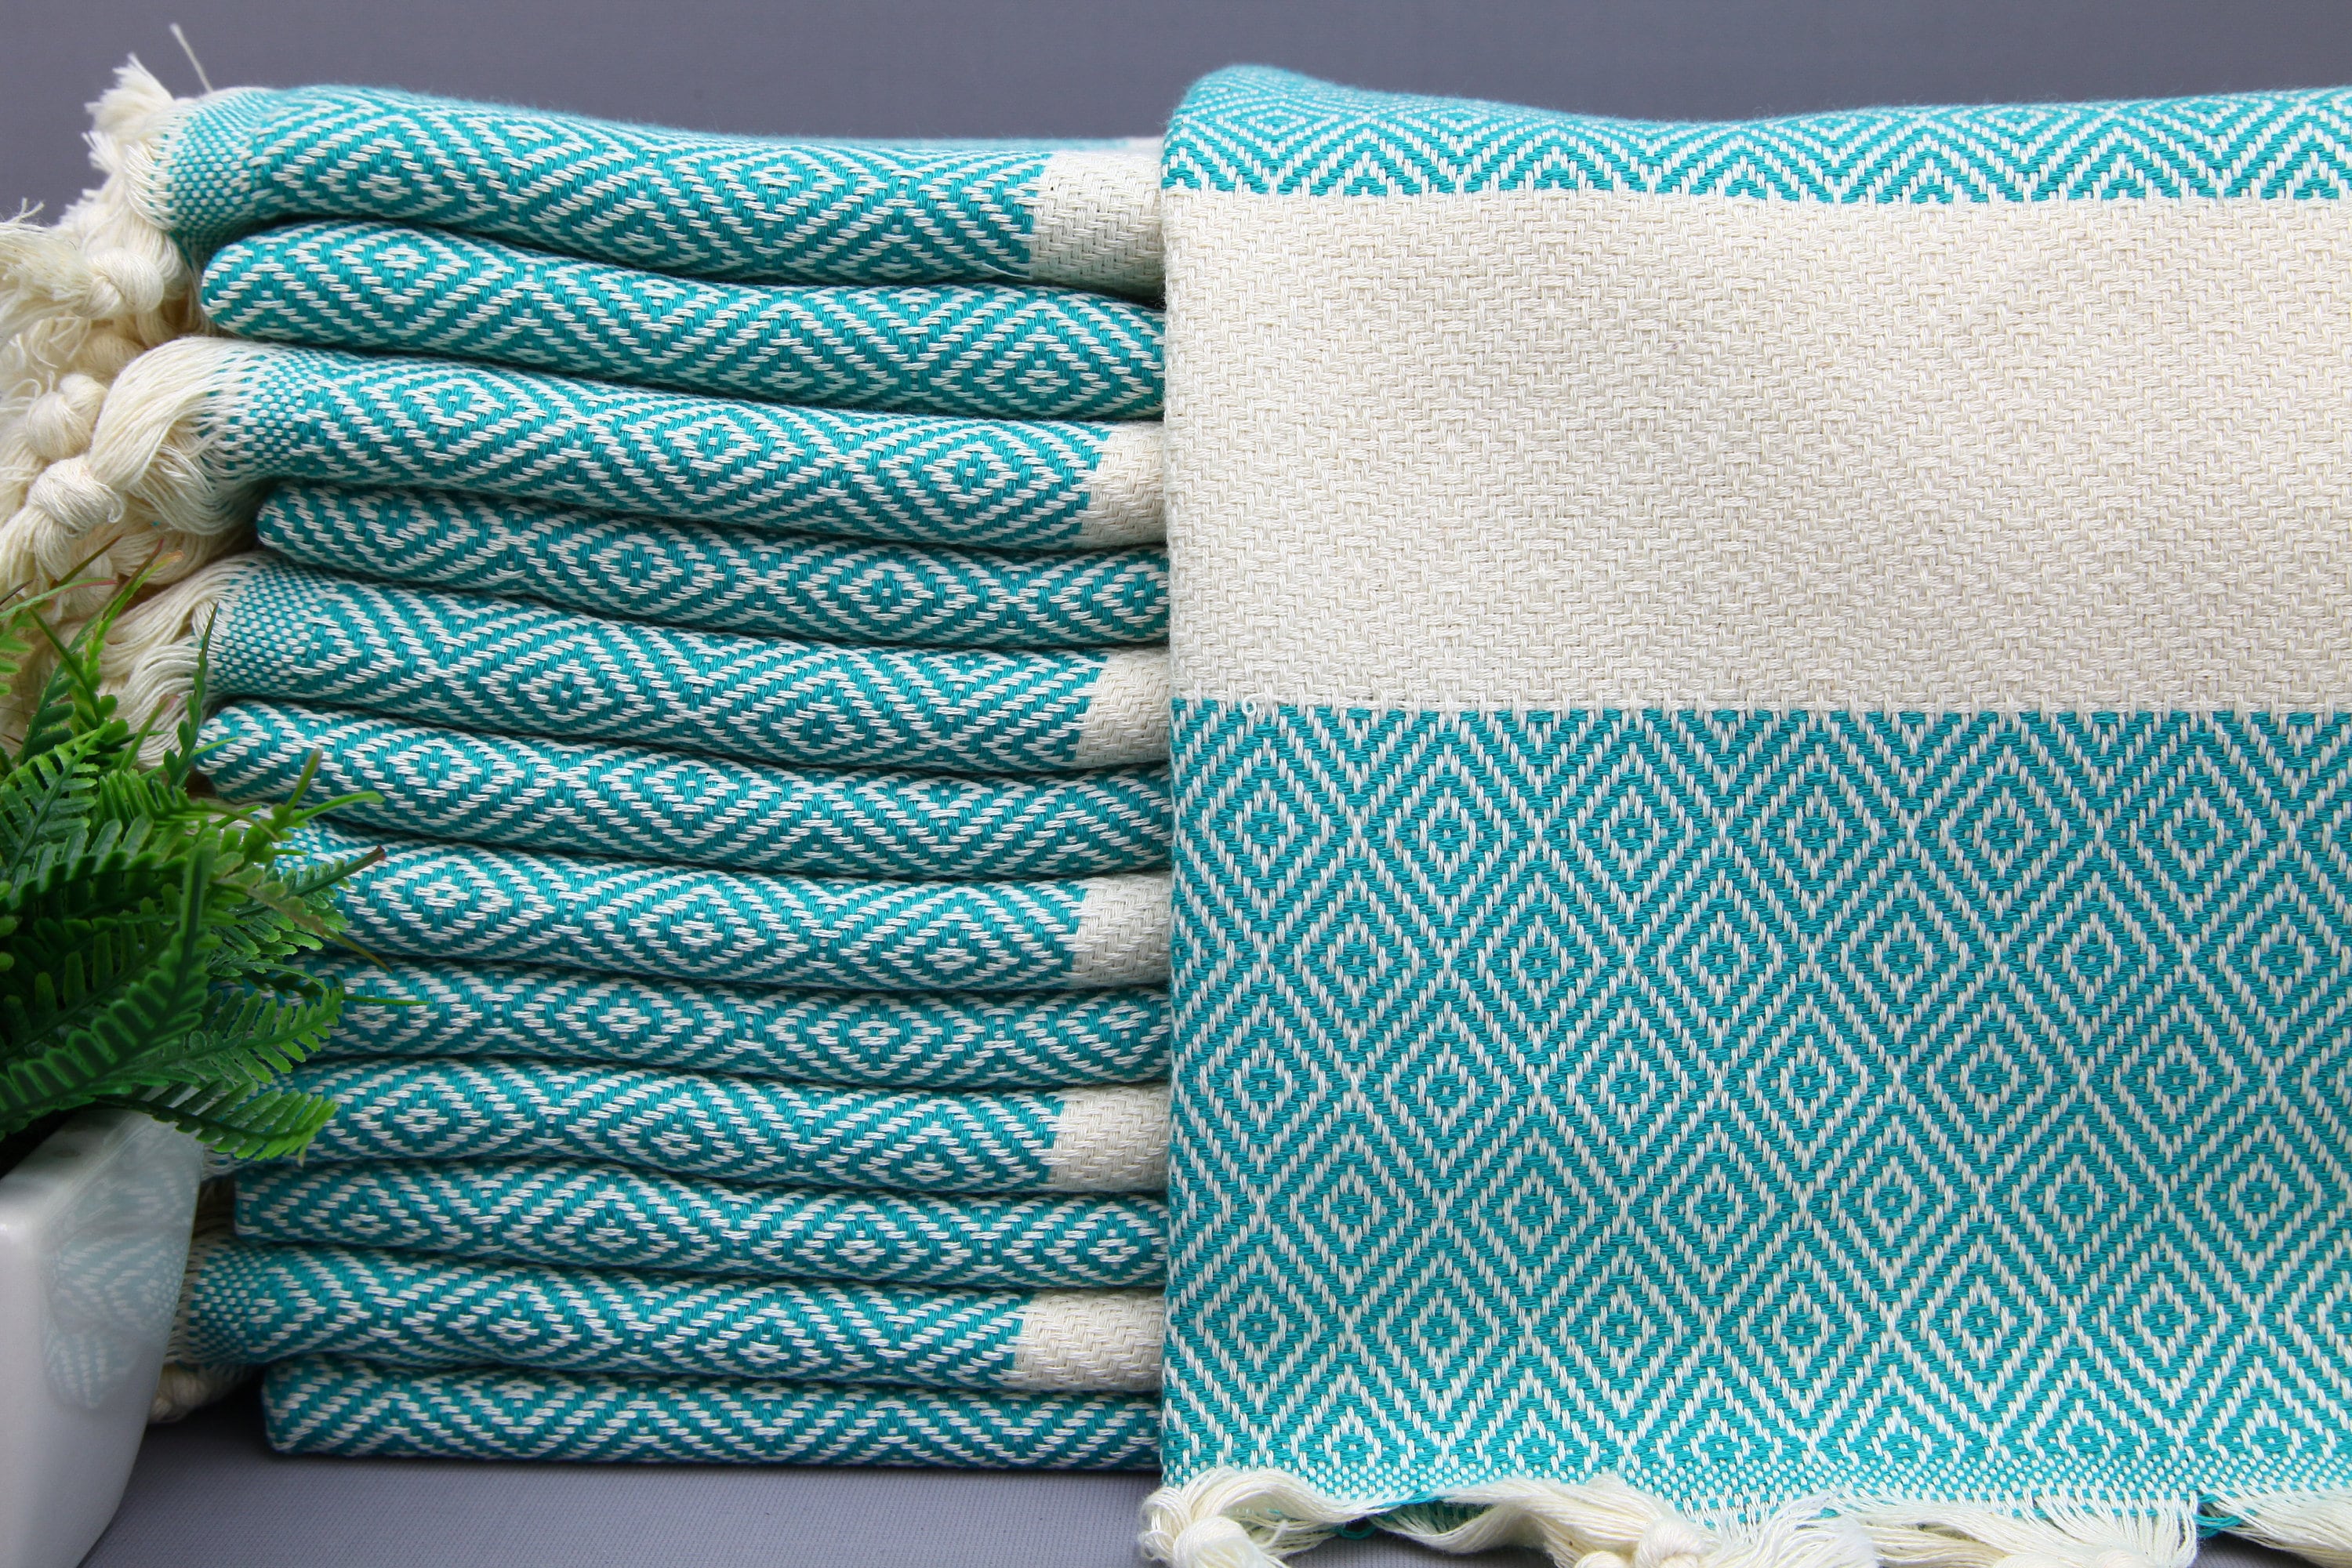 Turquoise Kitchen Towel 4 Pack Set 15x25 Dish Hand Drying Towels FREE  SHIPPING